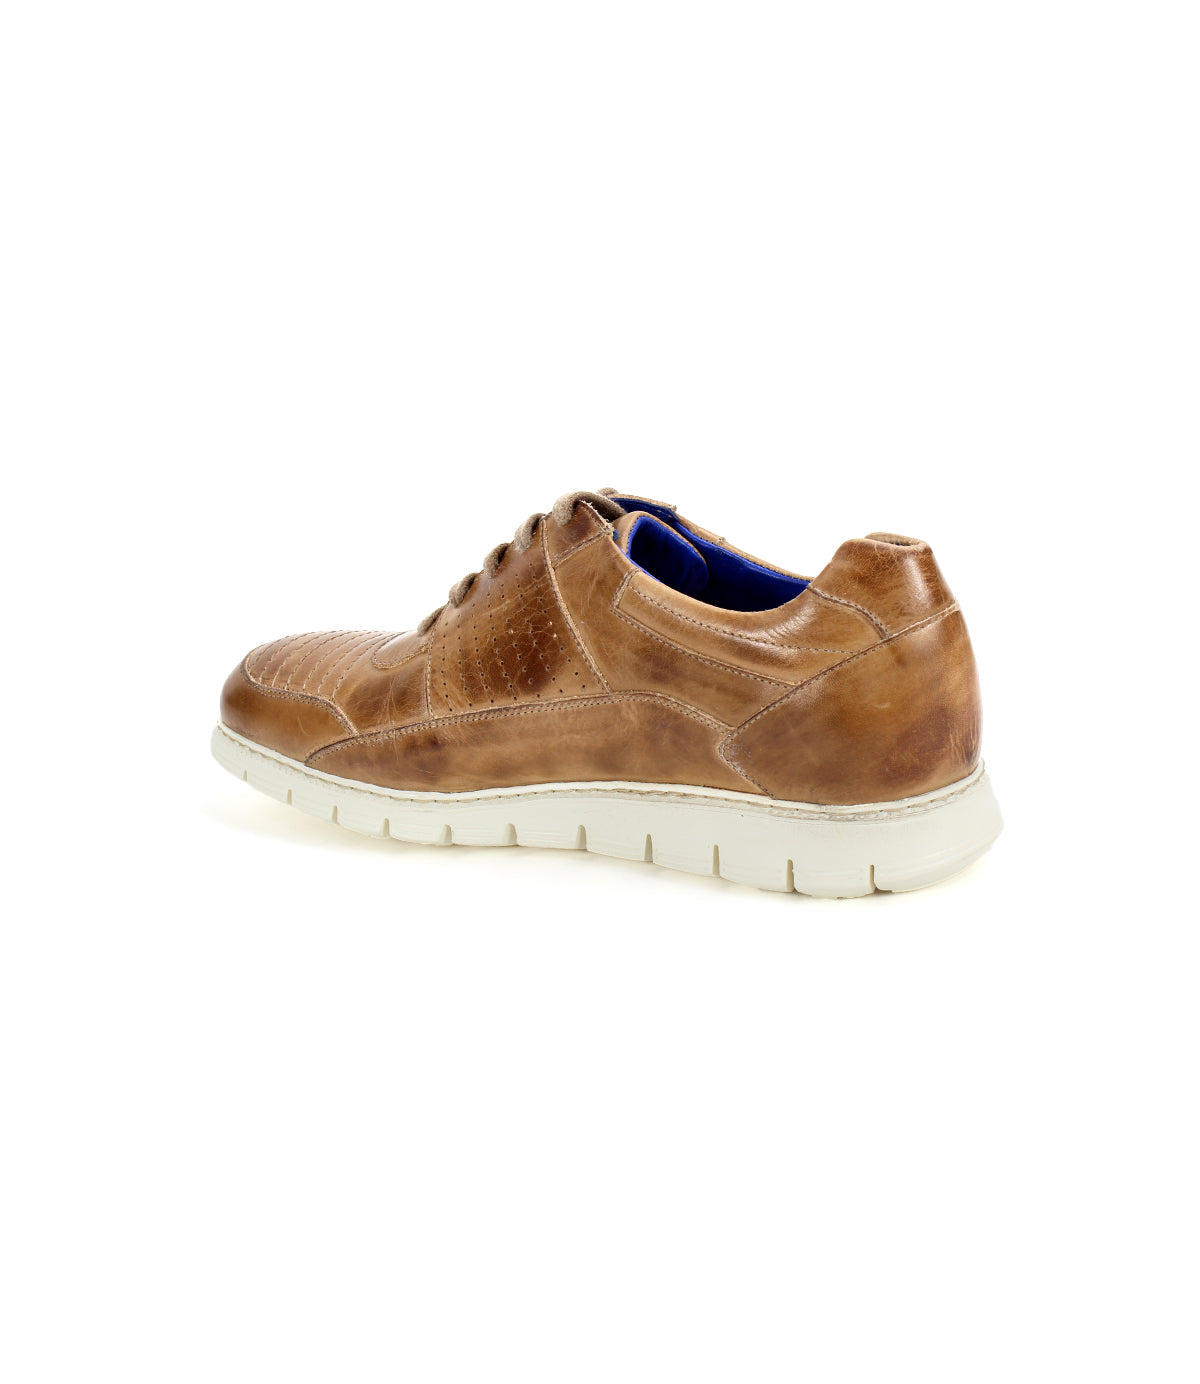 A men's Fairman tan leather sneaker with a white sole by Bed Stu.